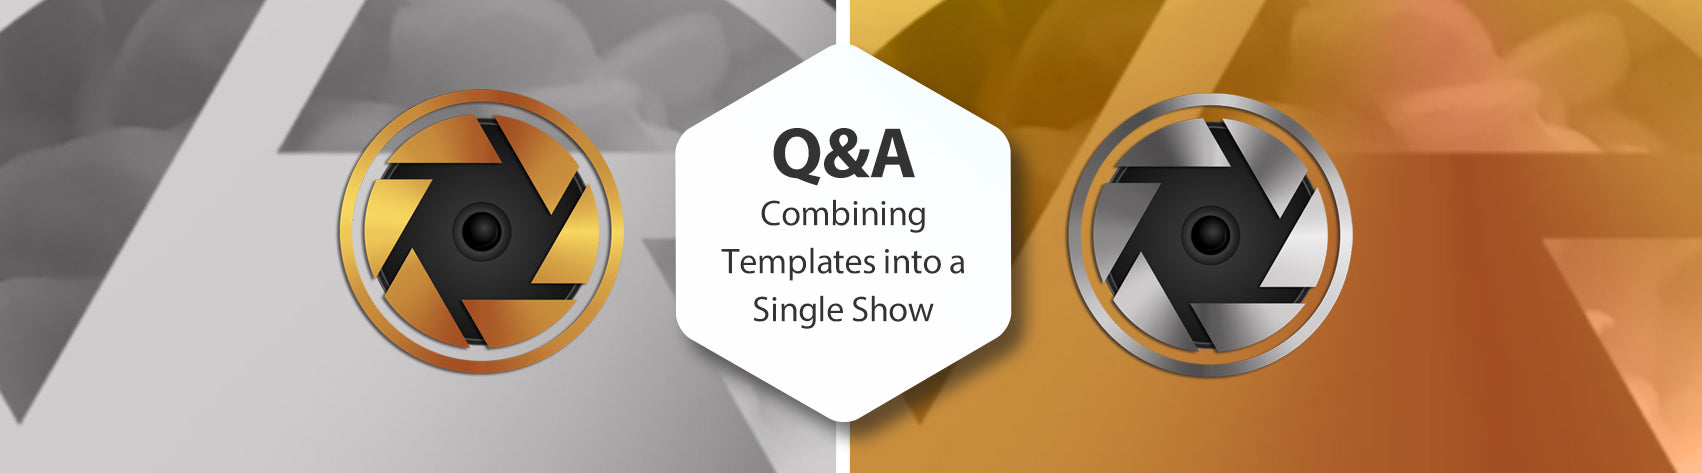 Q&A Combining Templates into a Single Show